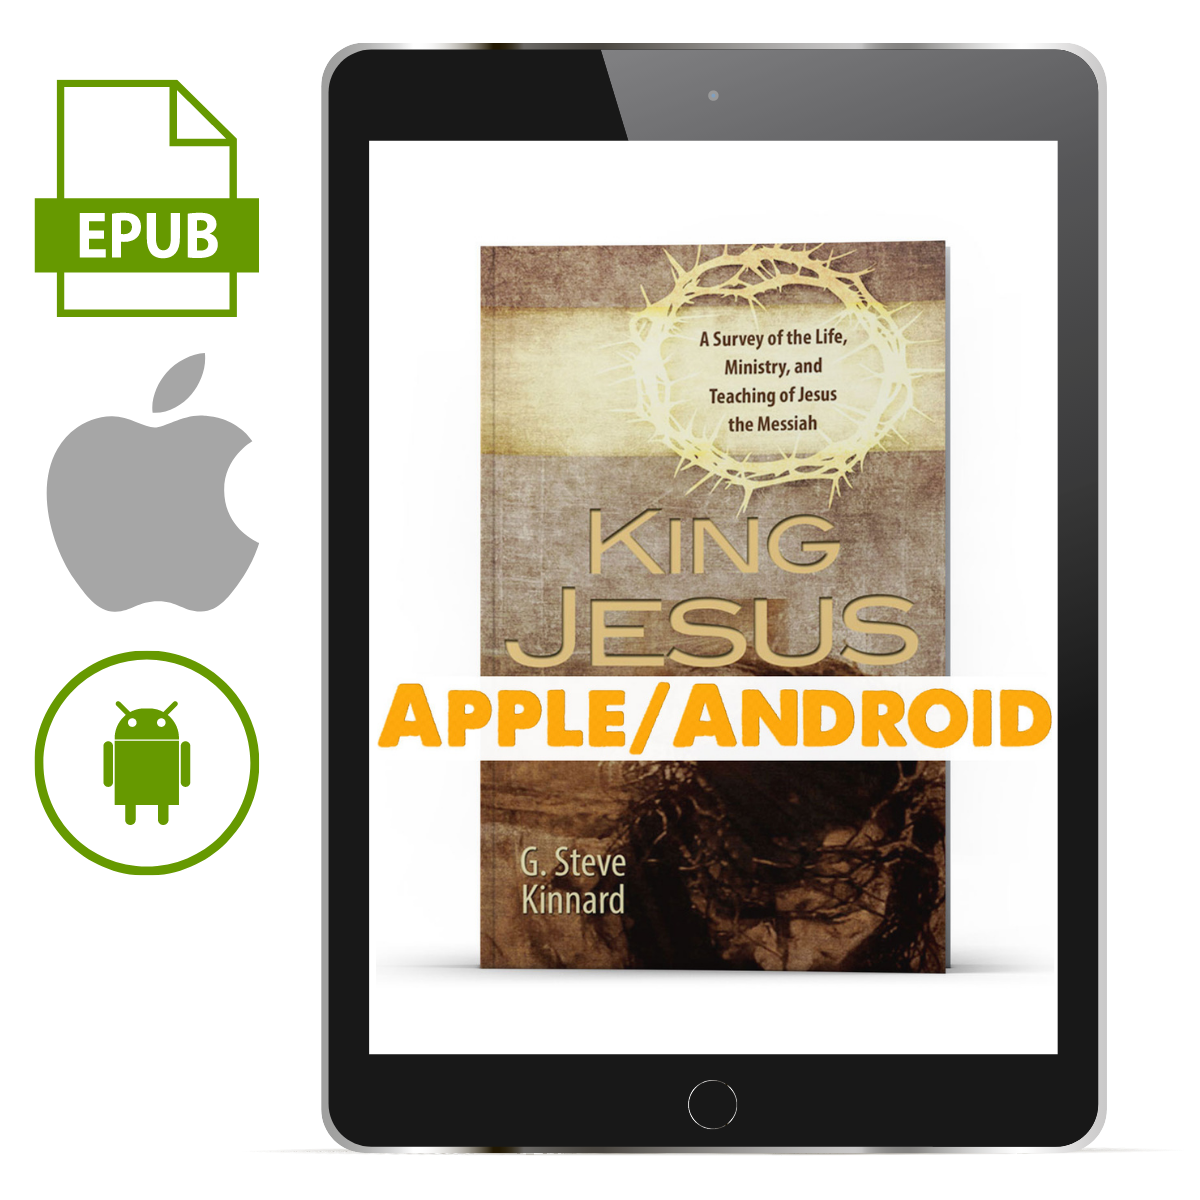 King Jesus: A Survey of the Life, Ministry, and Teaching of Jesus the Messiah Apple/Android - Illumination Publishers